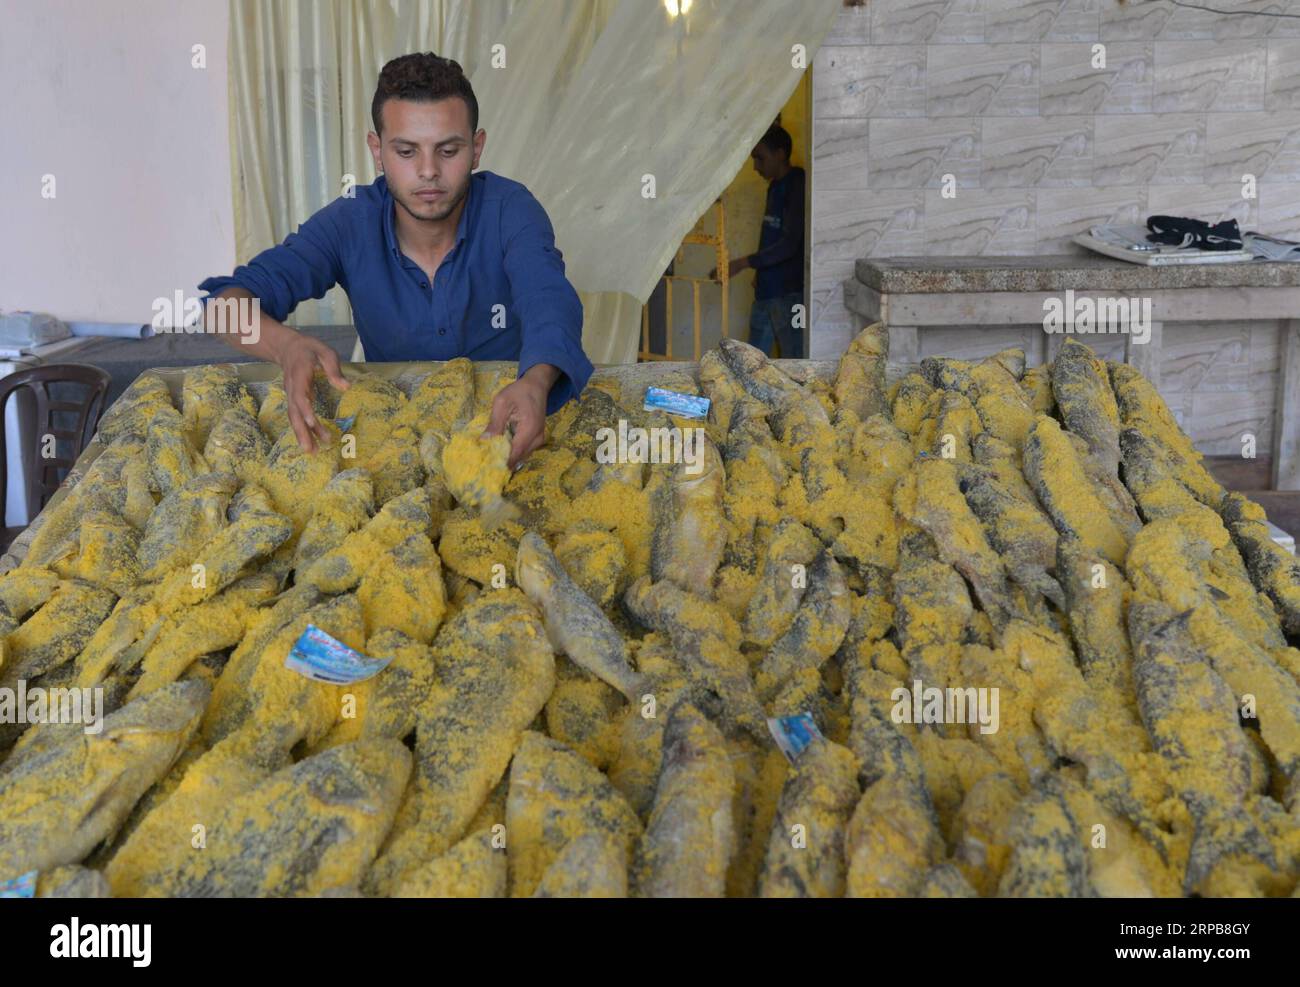 (190531) -- GAZA CITY, May 31, 2019 () -- A Palestinian vendor sells salted fish at a market ahead of the Eid al-Fitr in Gaza City, on May 31, 2019. () MIDEAST-GAZA-EID AL-FITR Xinhua PUBLICATIONxNOTxINxCHN Stock Photo